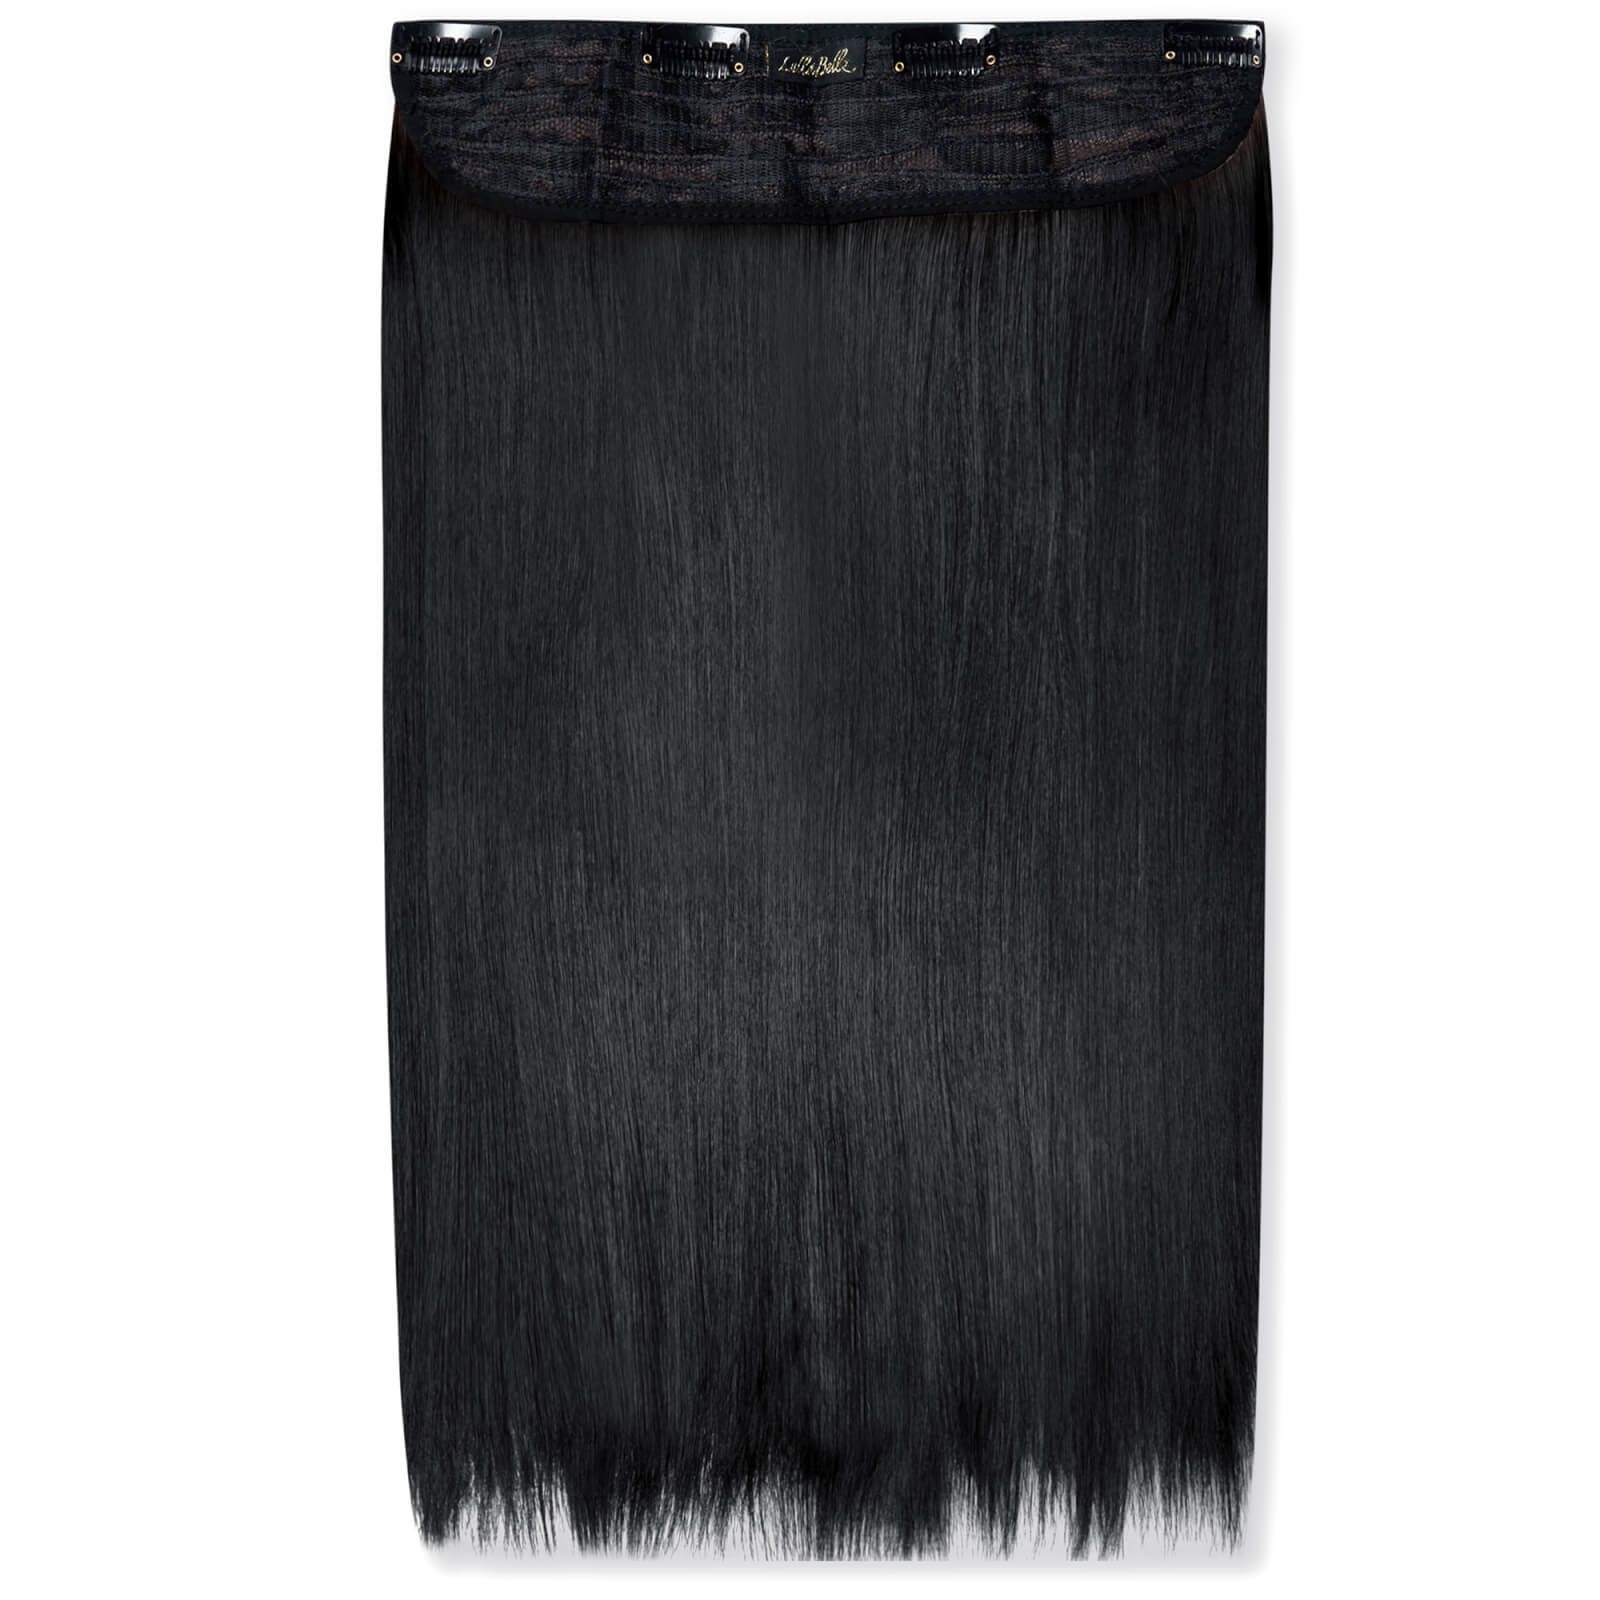 LullaBellz Thick 18 1-Piece Straight Clip in Hair Extensions (Various Colours) - Jet Black